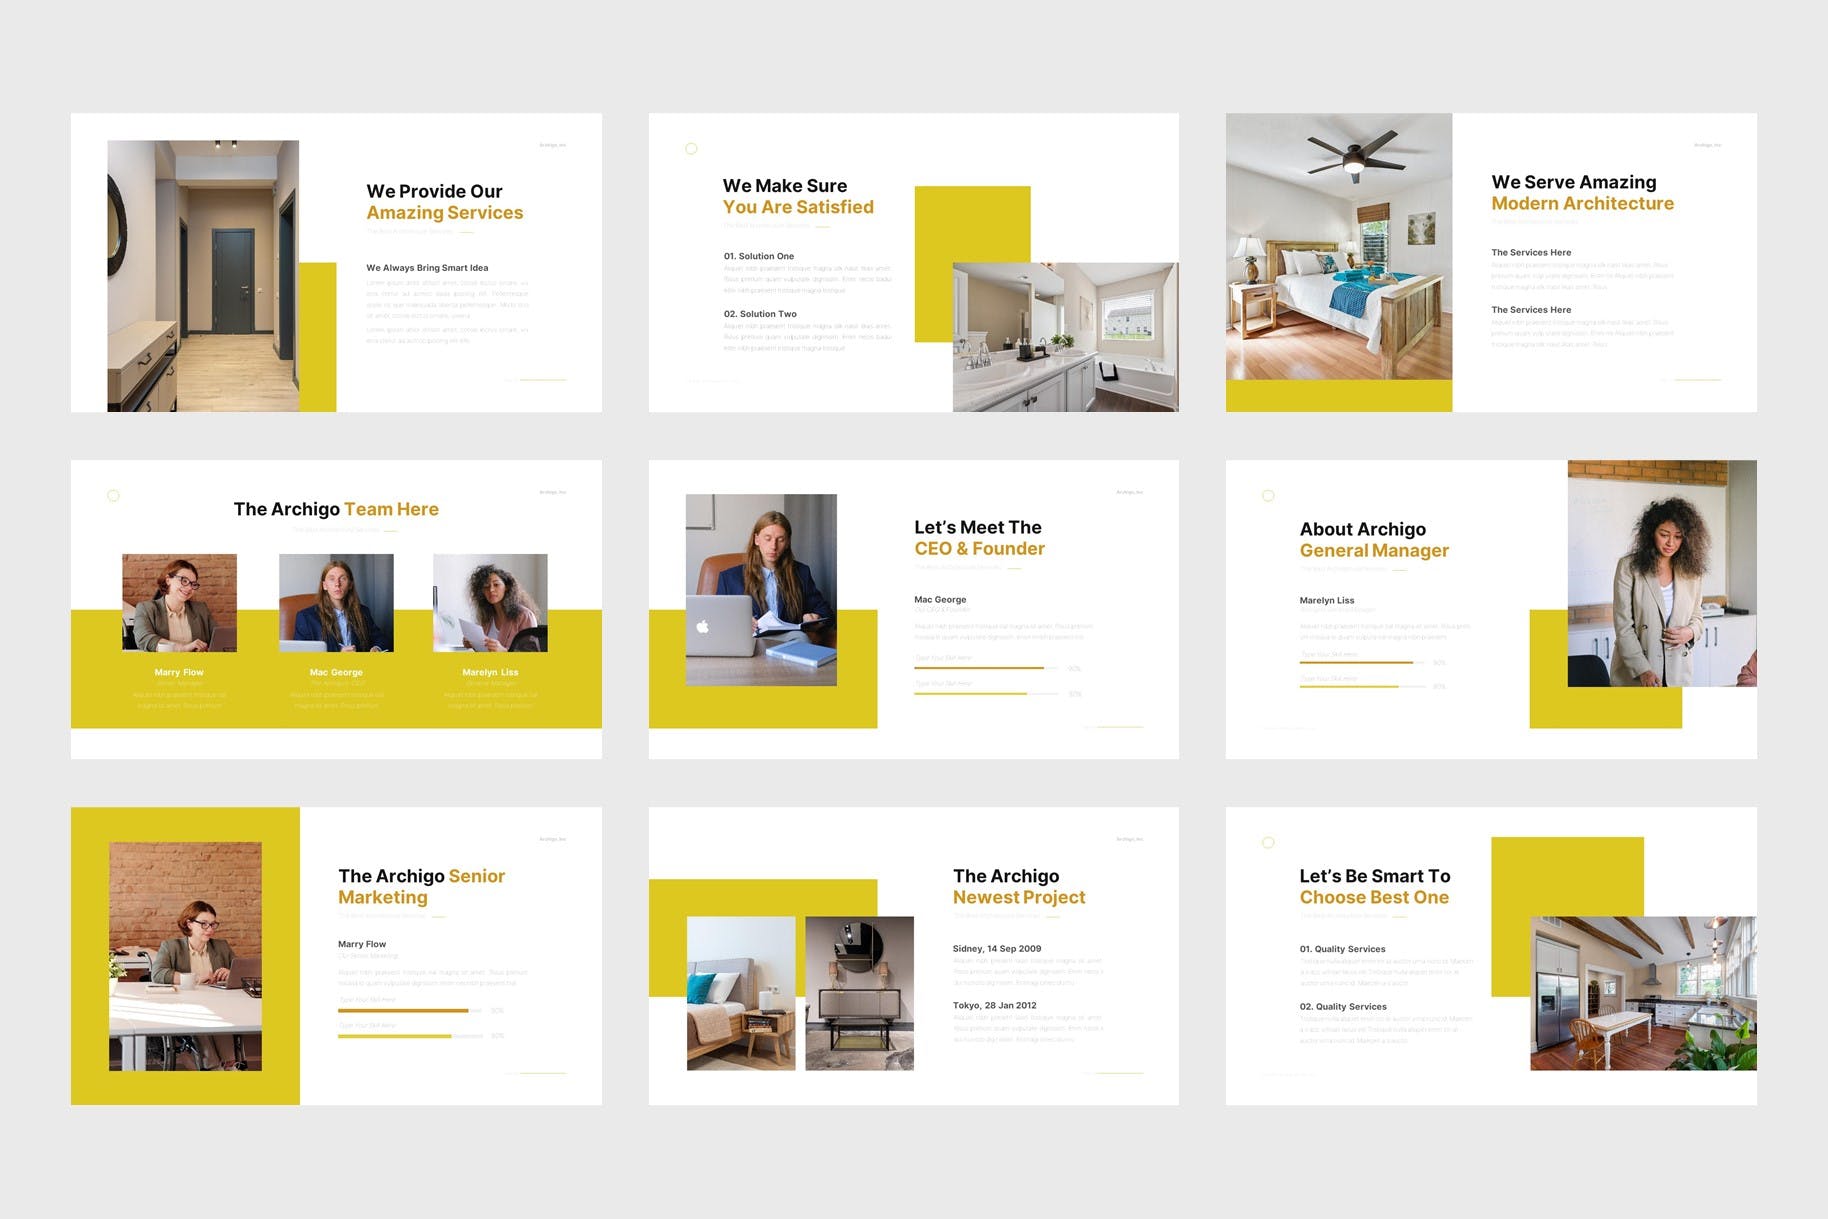 This template can be used for presenting your architecture plan, business, creative ideas, startups project, education learning and many more.